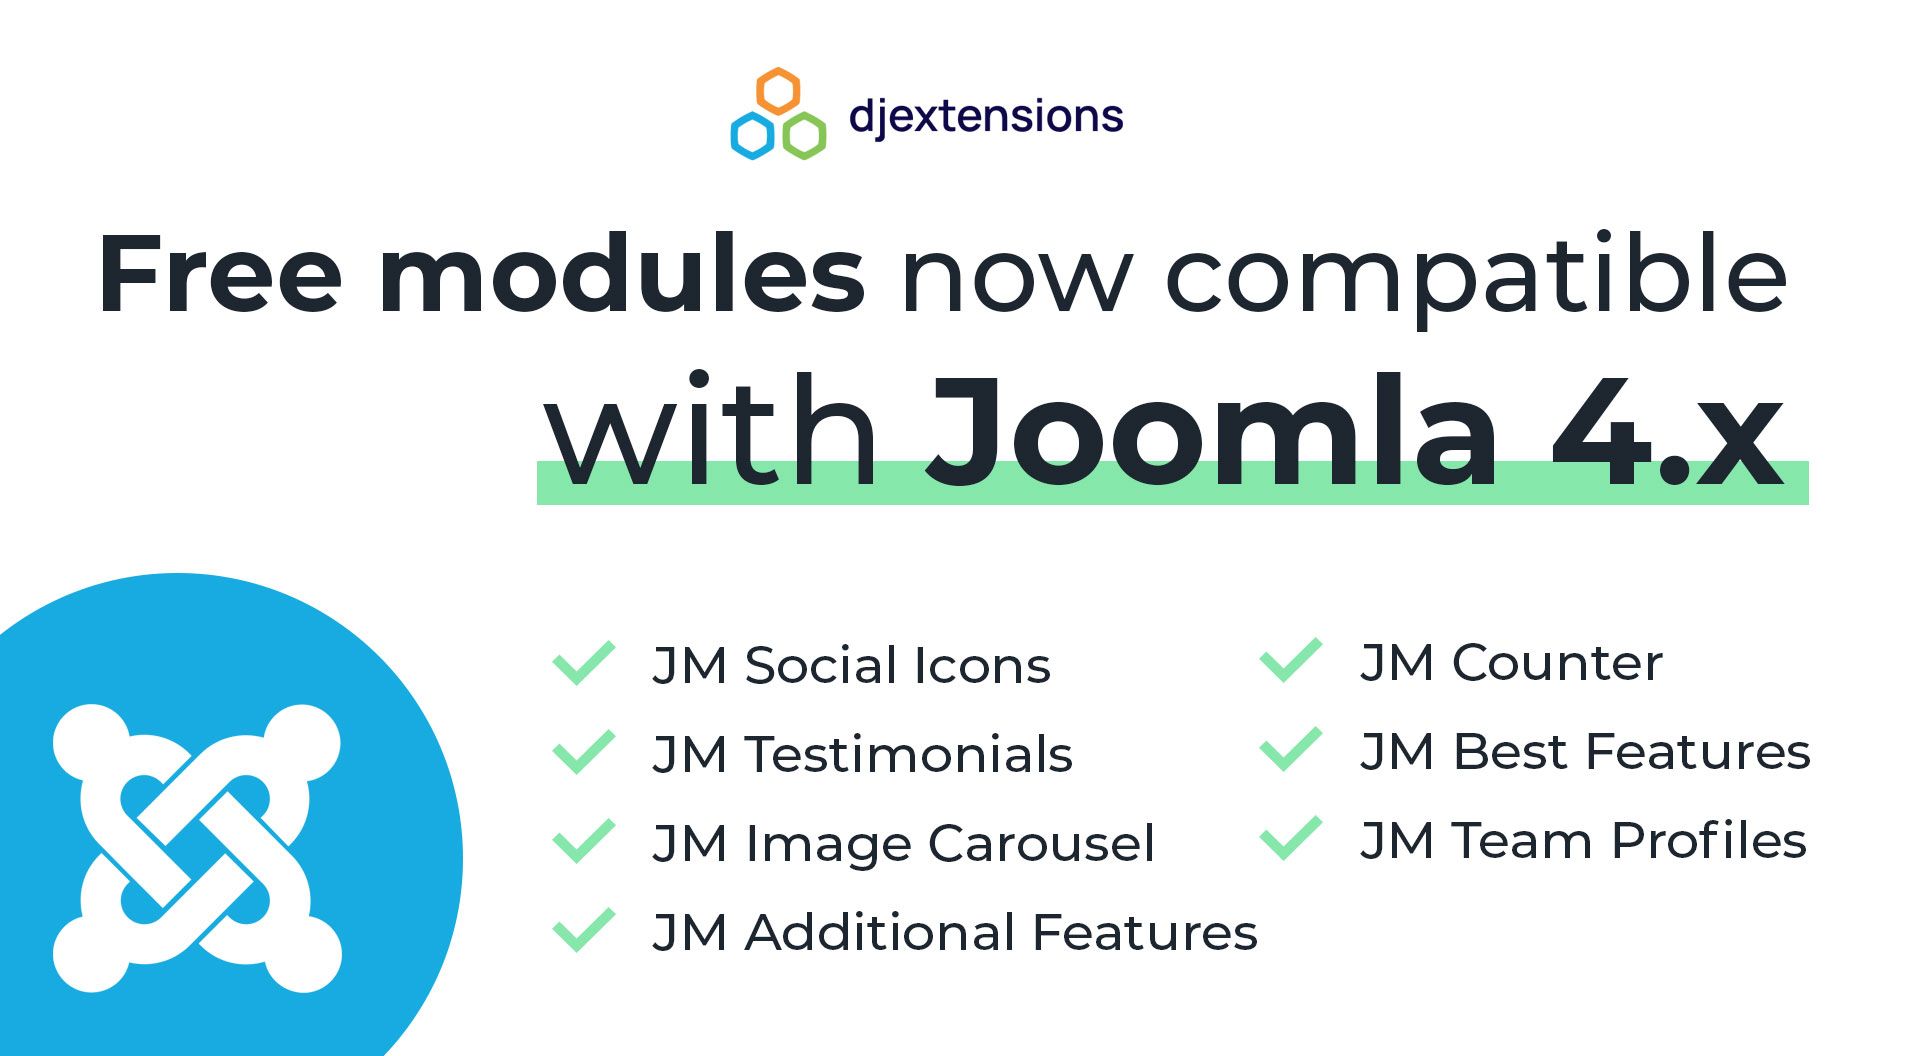 UPDATE - FREE Joomla modules are now compatible with Joomla 4.x!